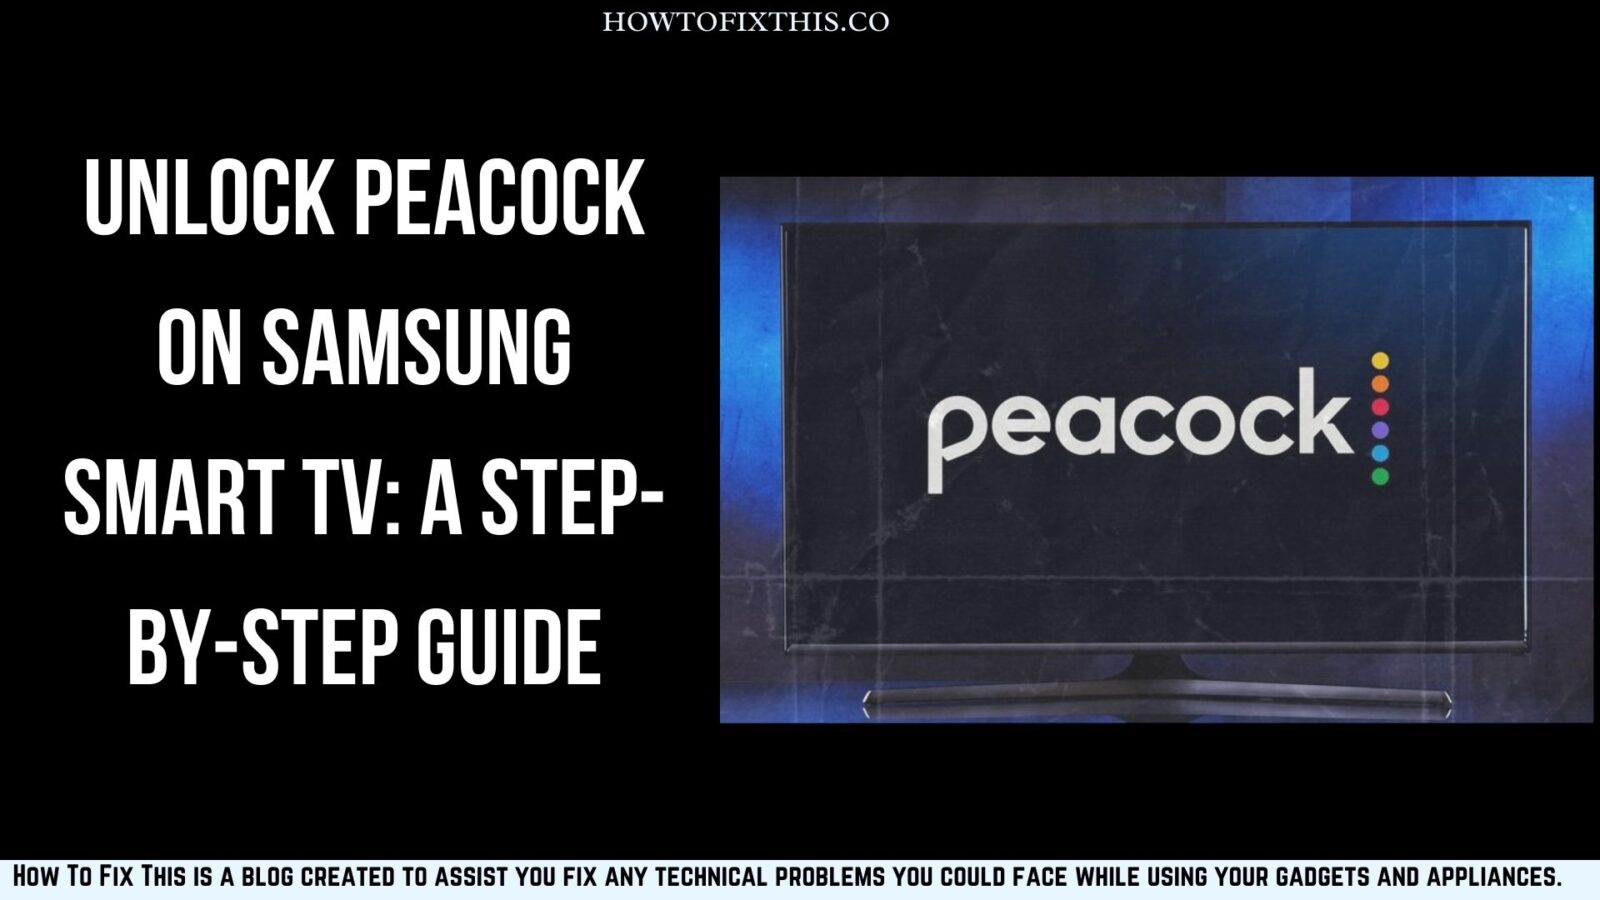 Unlock Peacock on Samsung Smart TV: A Step-by-Step Guide